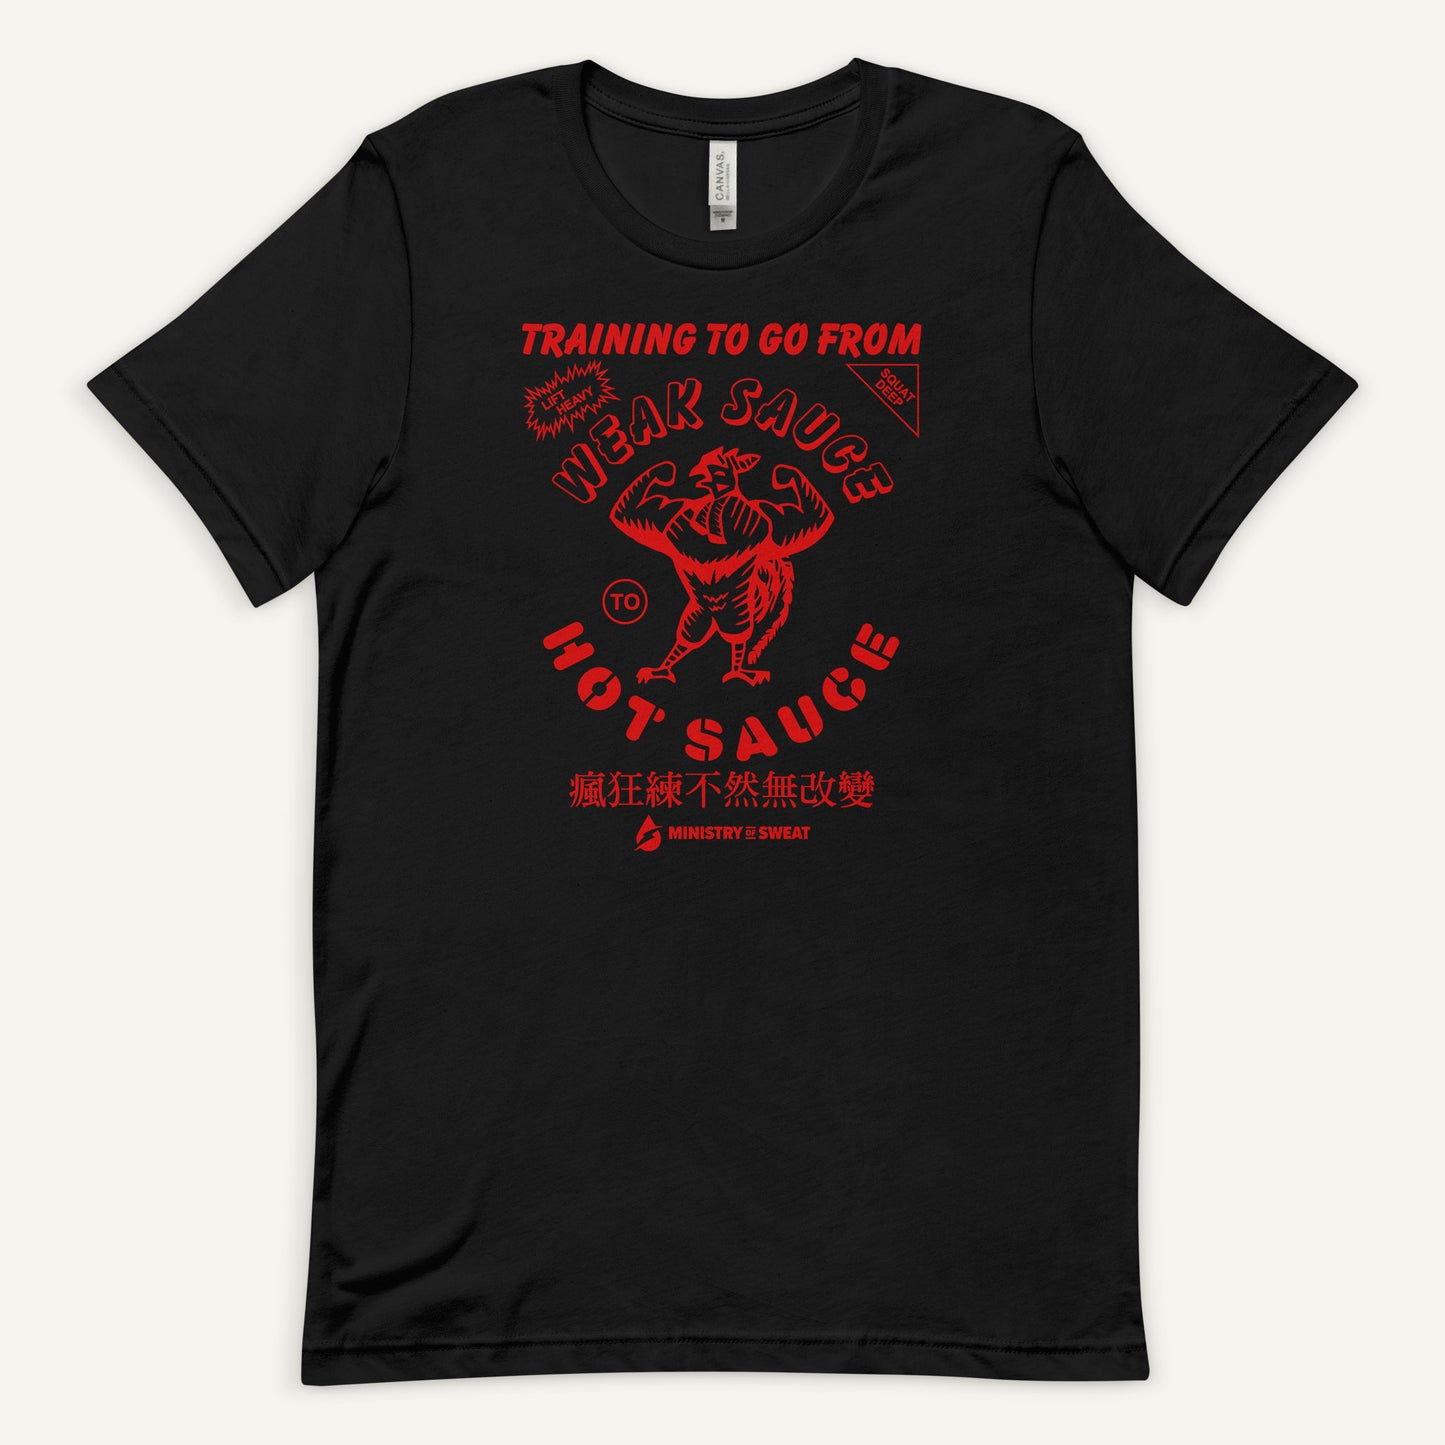 Training To Go From Weak Sauce To Hot Sauce Men's Standard T-Shirt